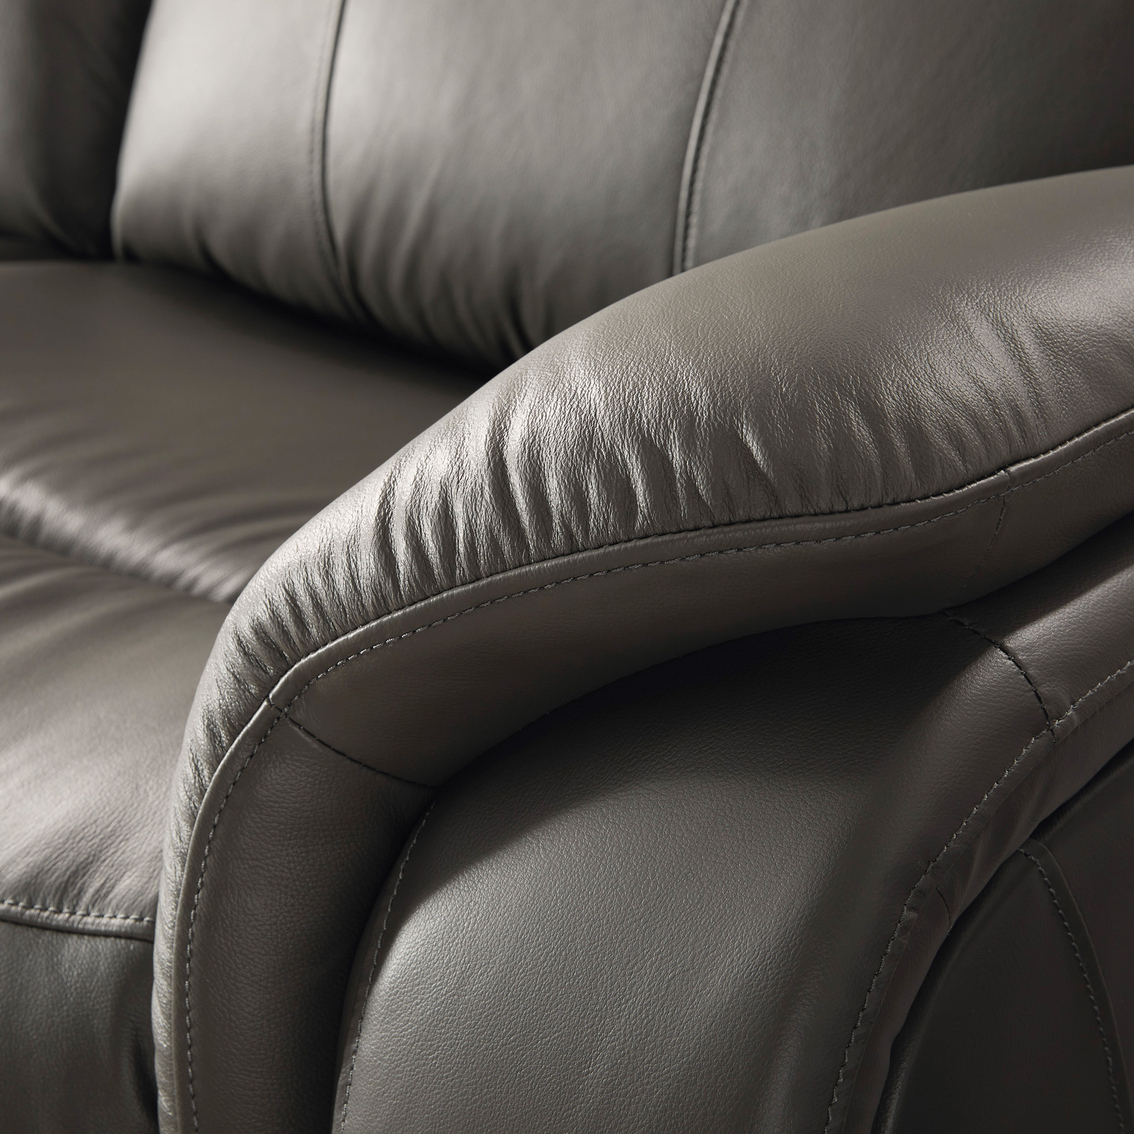 Signature Design by Ashley Chasewood Power Recliner - Image 7 of 9